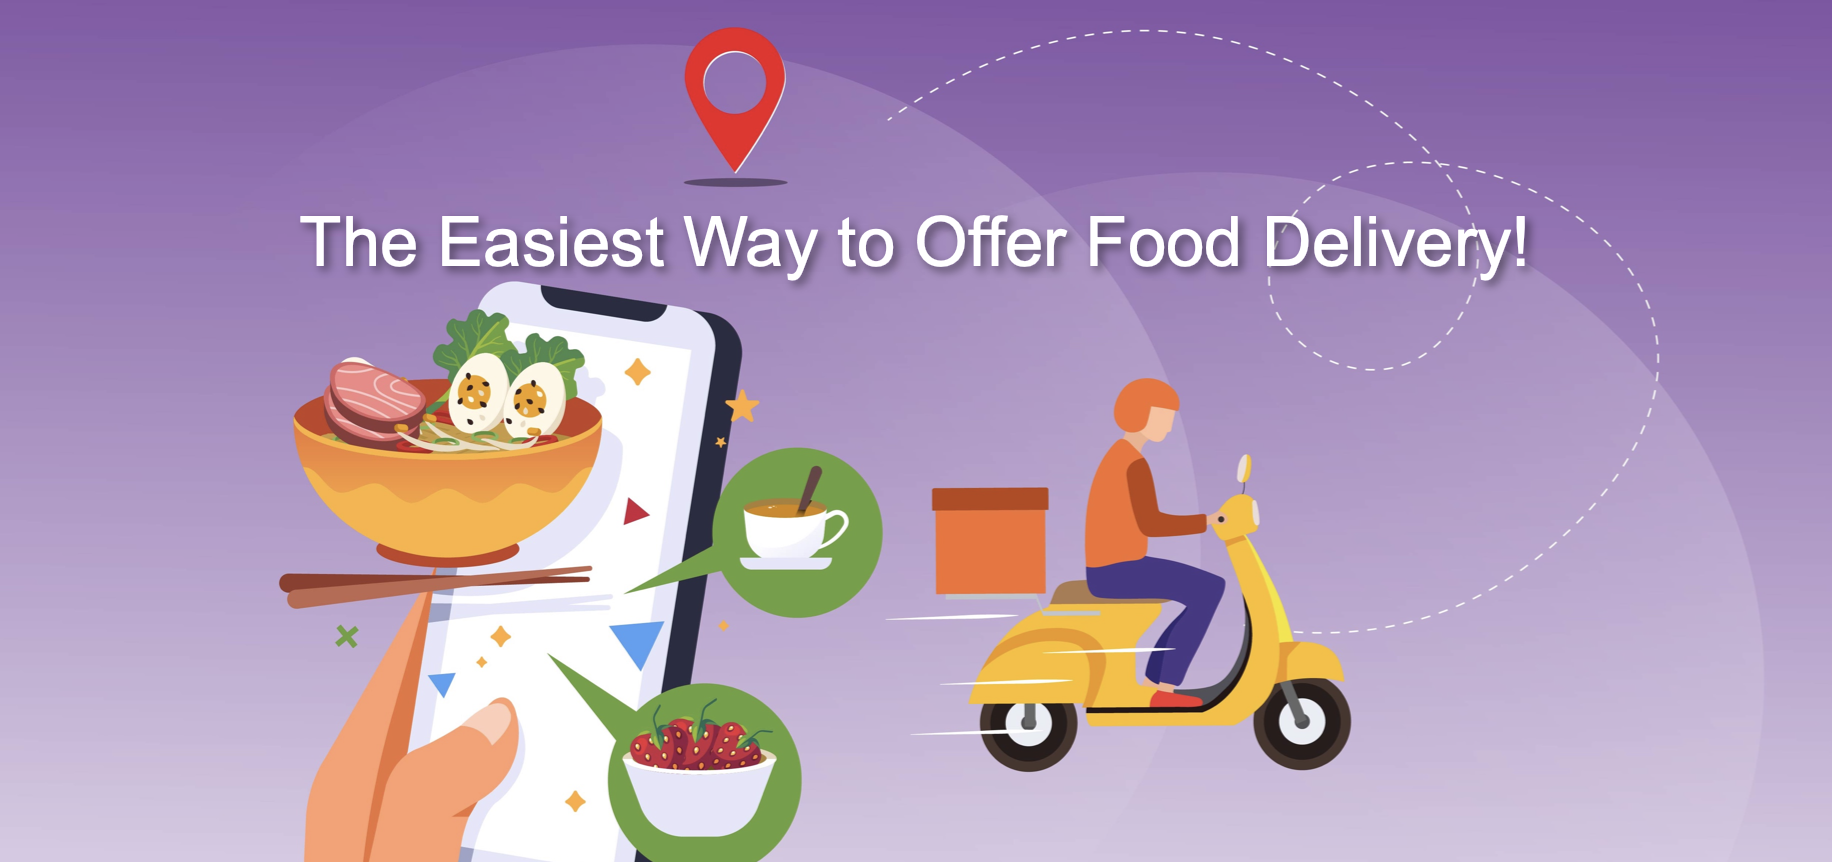 What’s the Easiest Way to Offer Food Delivery? 